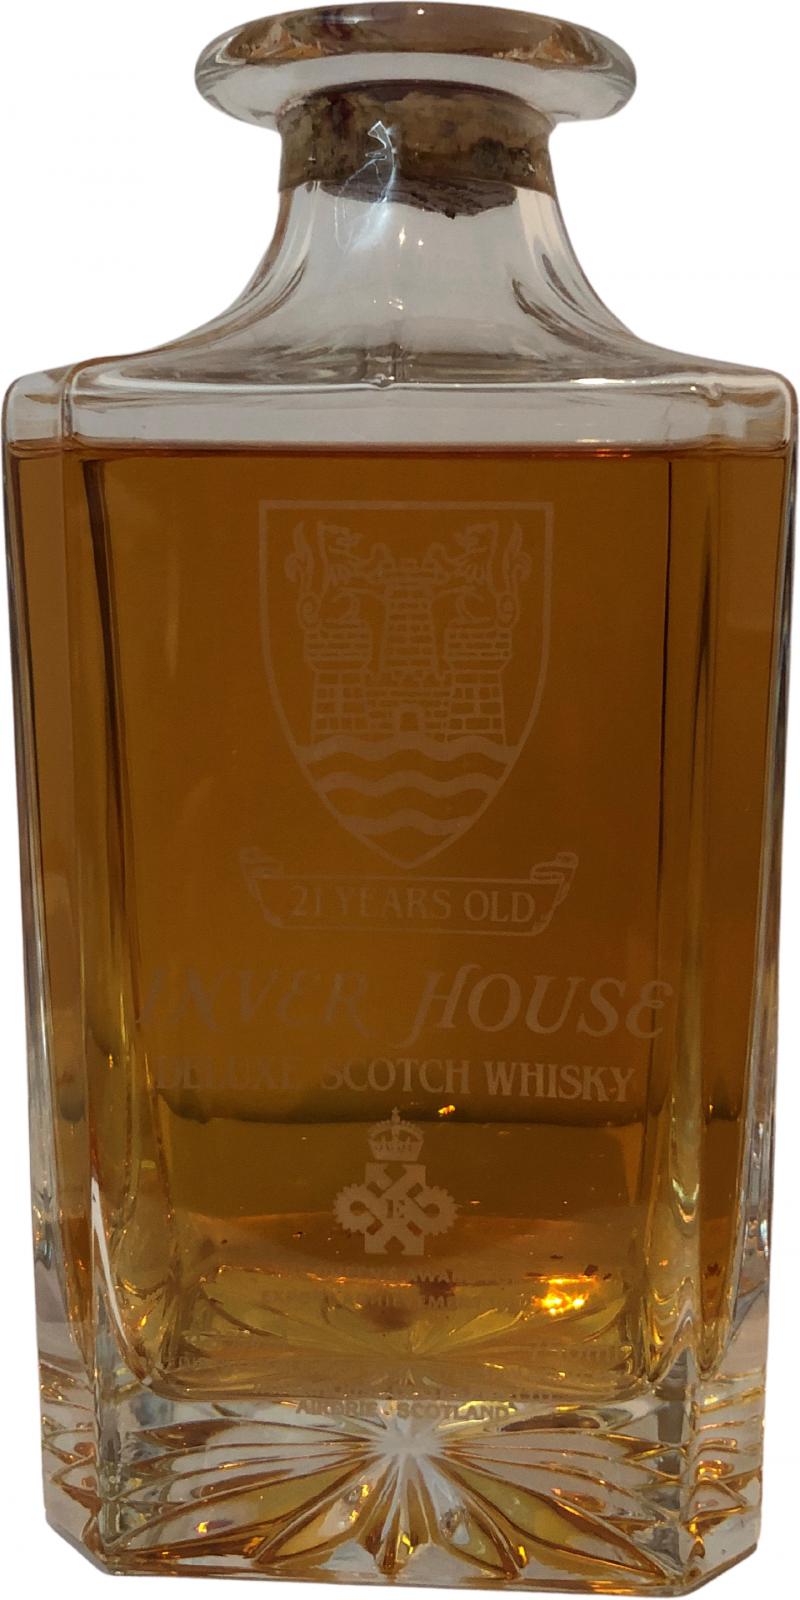 Inver House 21yo Deluxe Scotch Whisky 43% 750ml